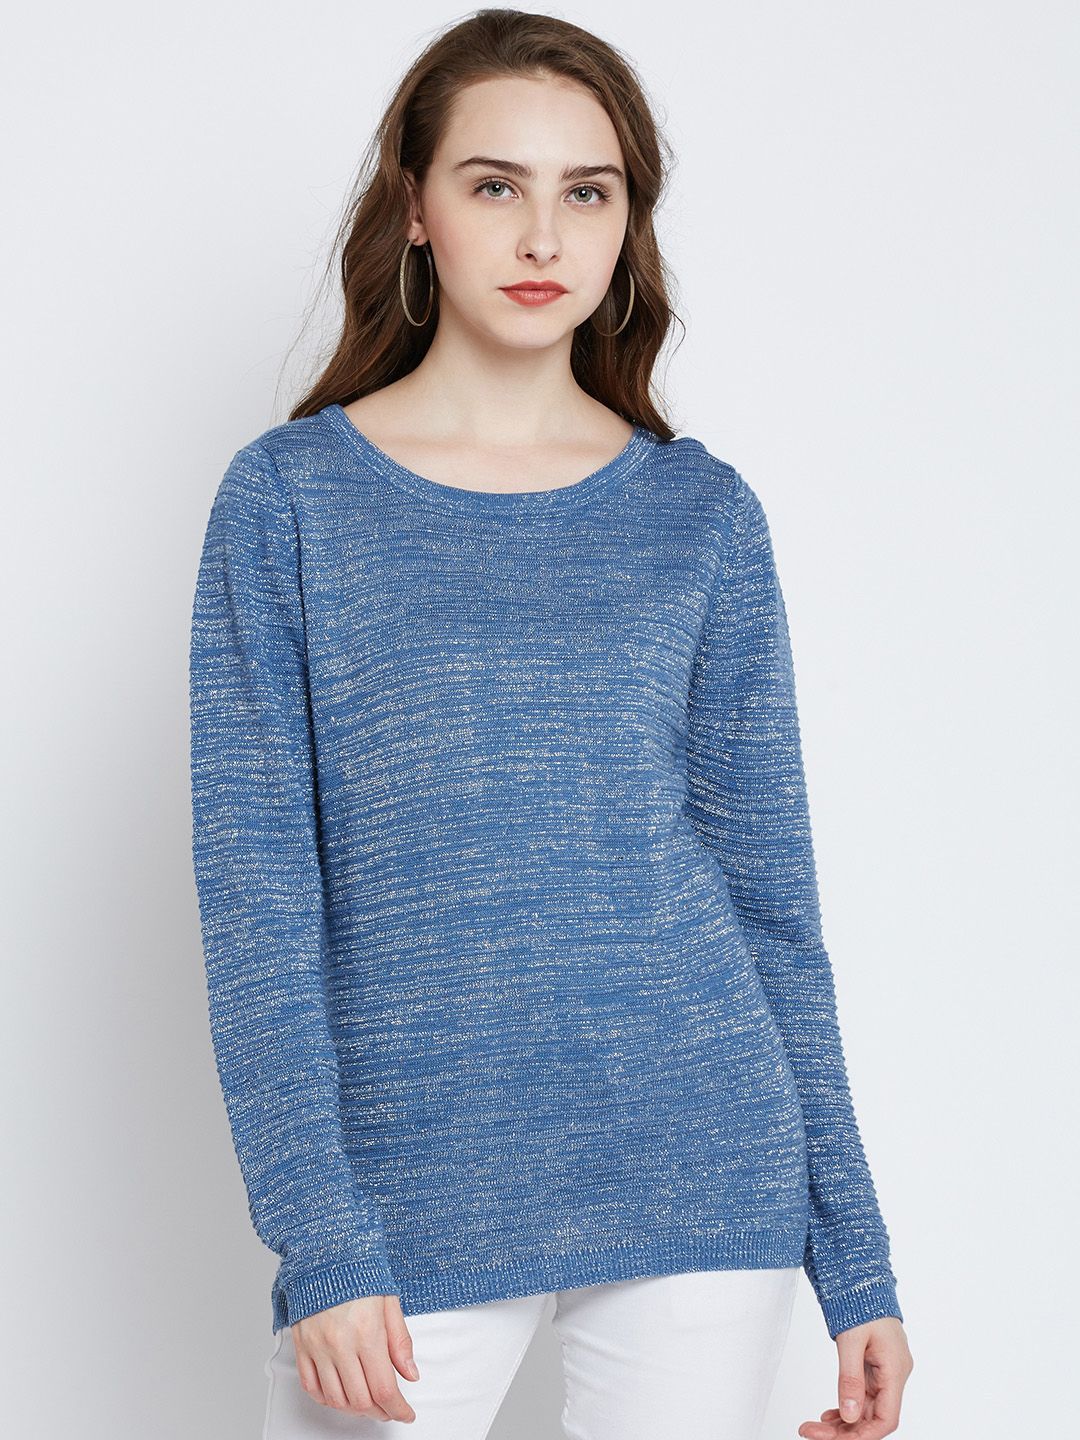 Marie Claire Women Blue Solid Pullover Price in India